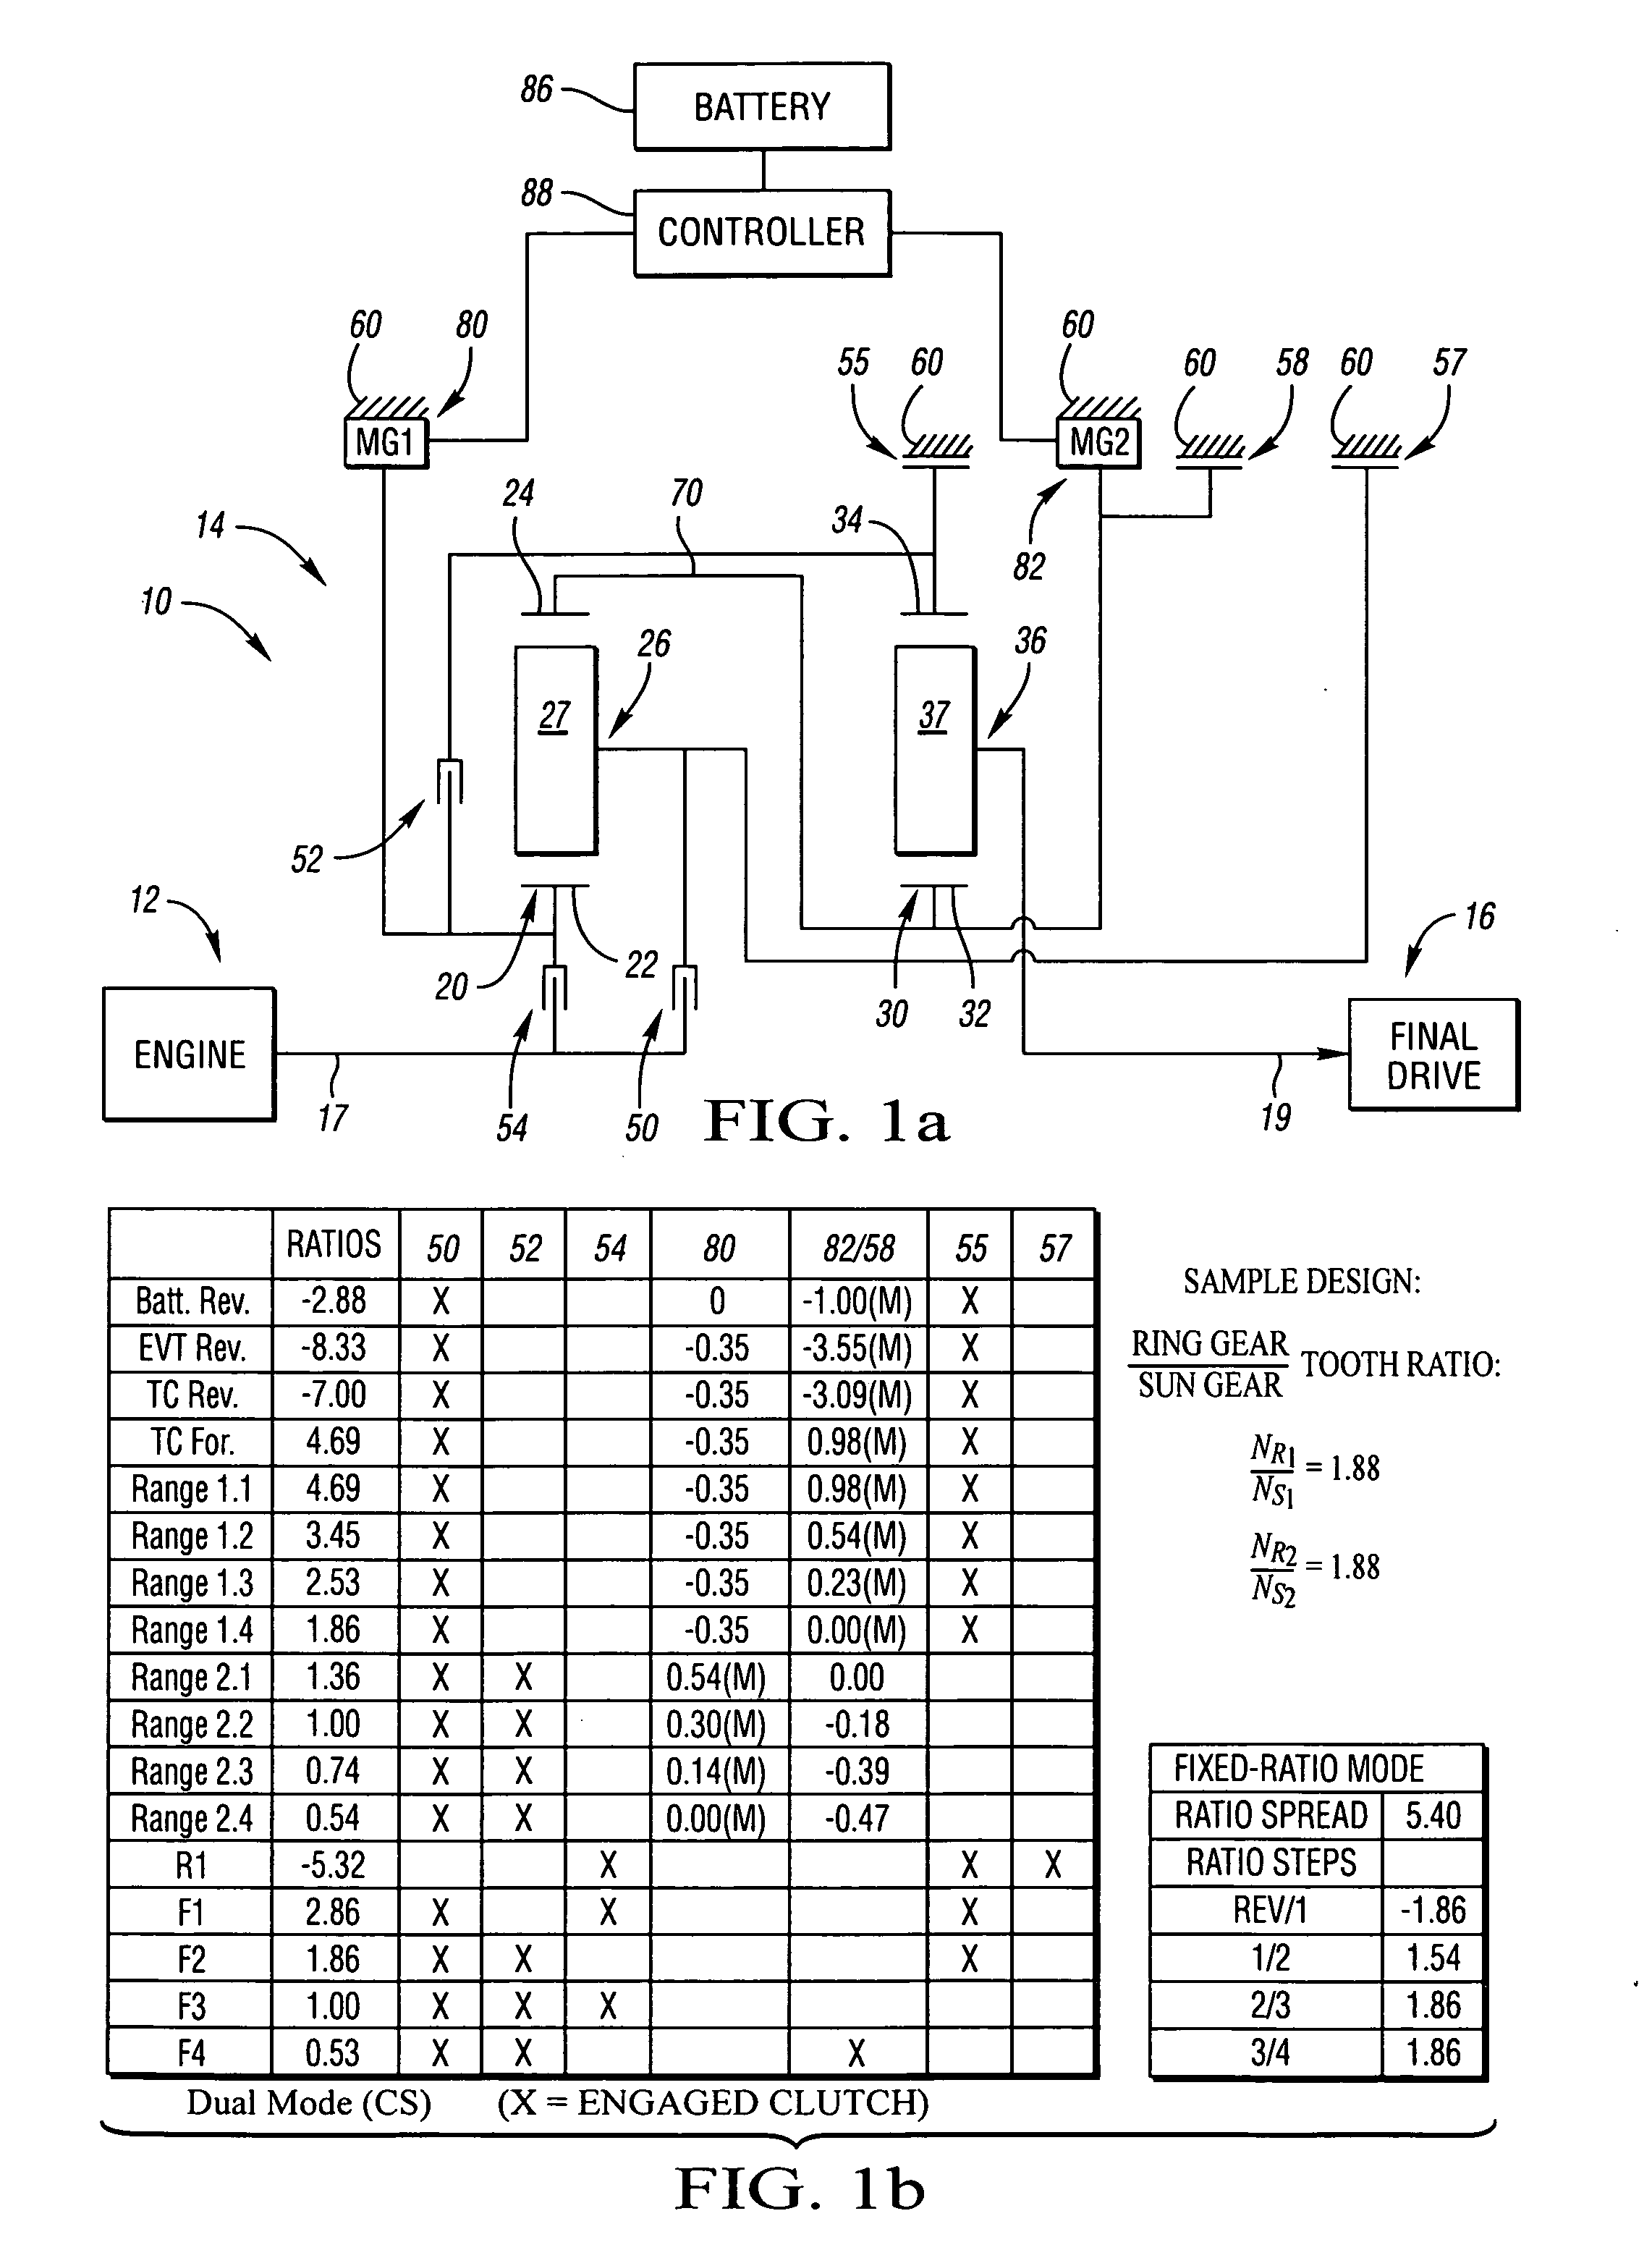 Two-planetary electrically variable transmissions with multiple fixed ratios